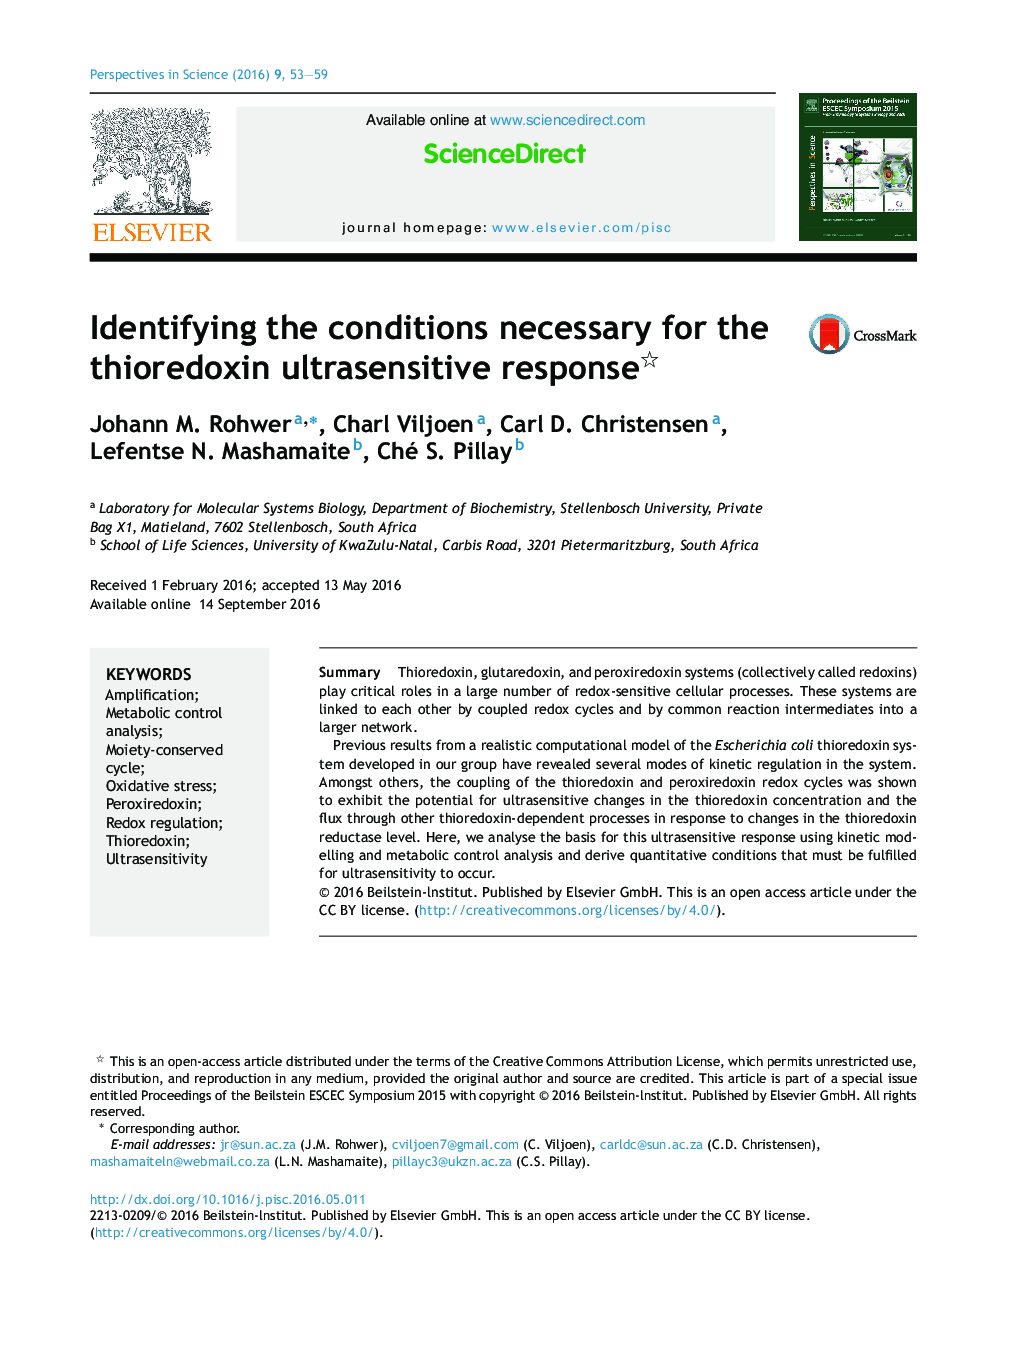 Identifying the conditions necessary for the thioredoxin ultrasensitive response